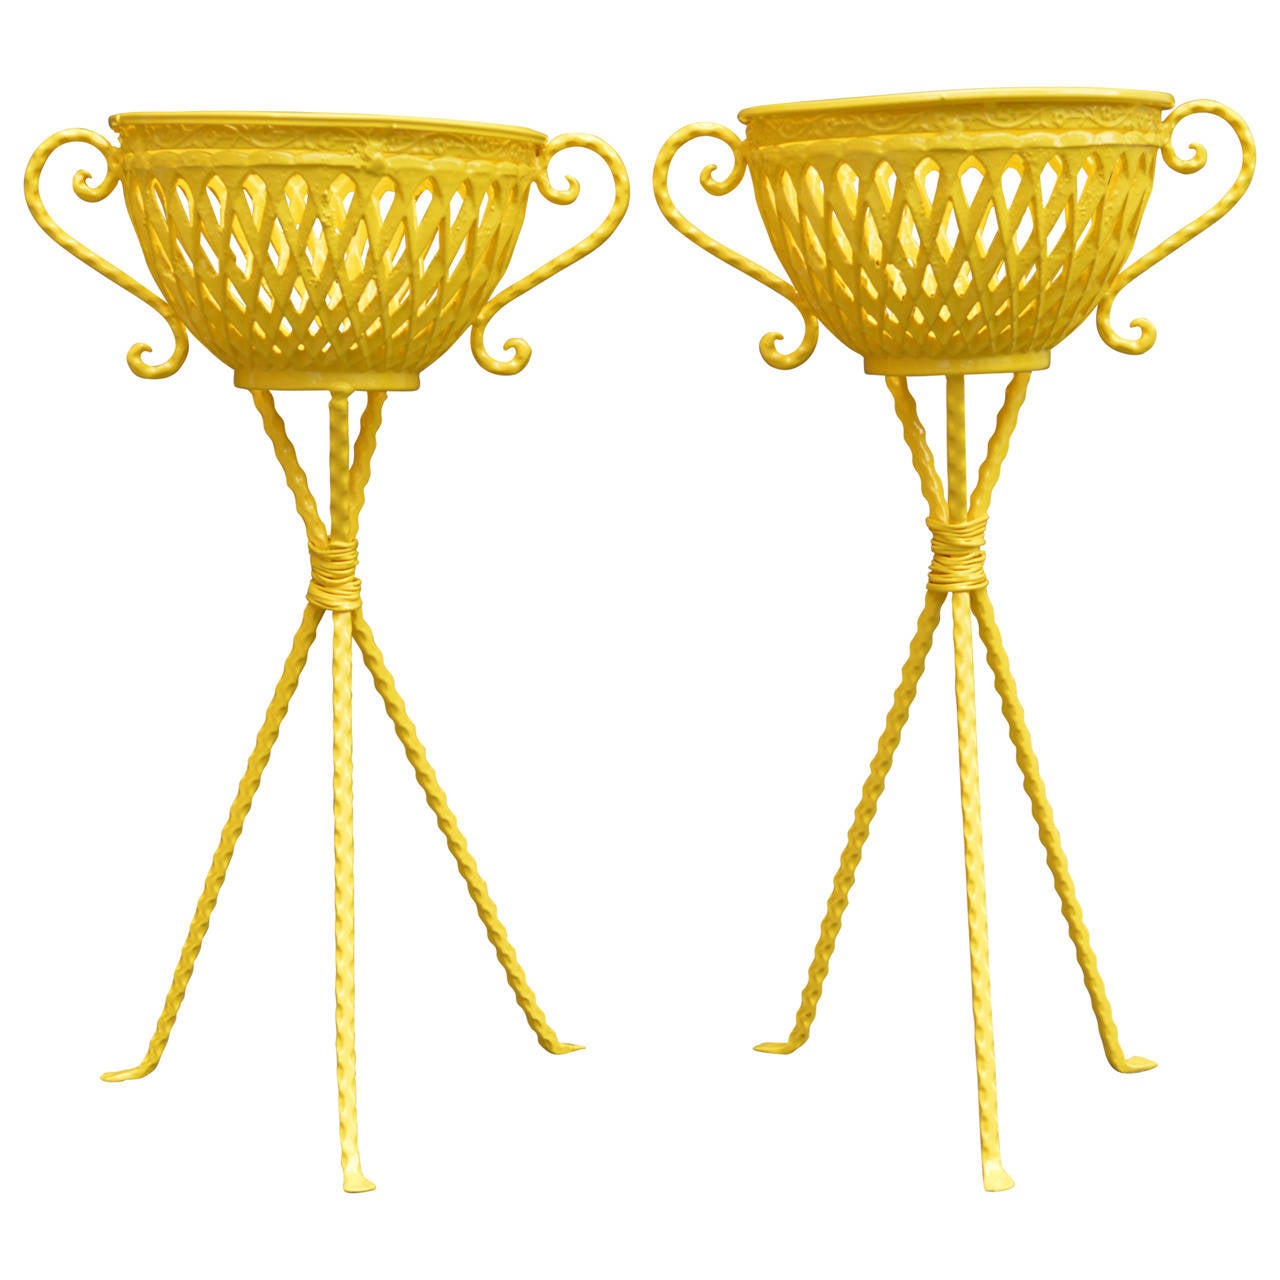 Beautiful pair of sun yellow wrought iron garden planters.
Overall dimensions: 24